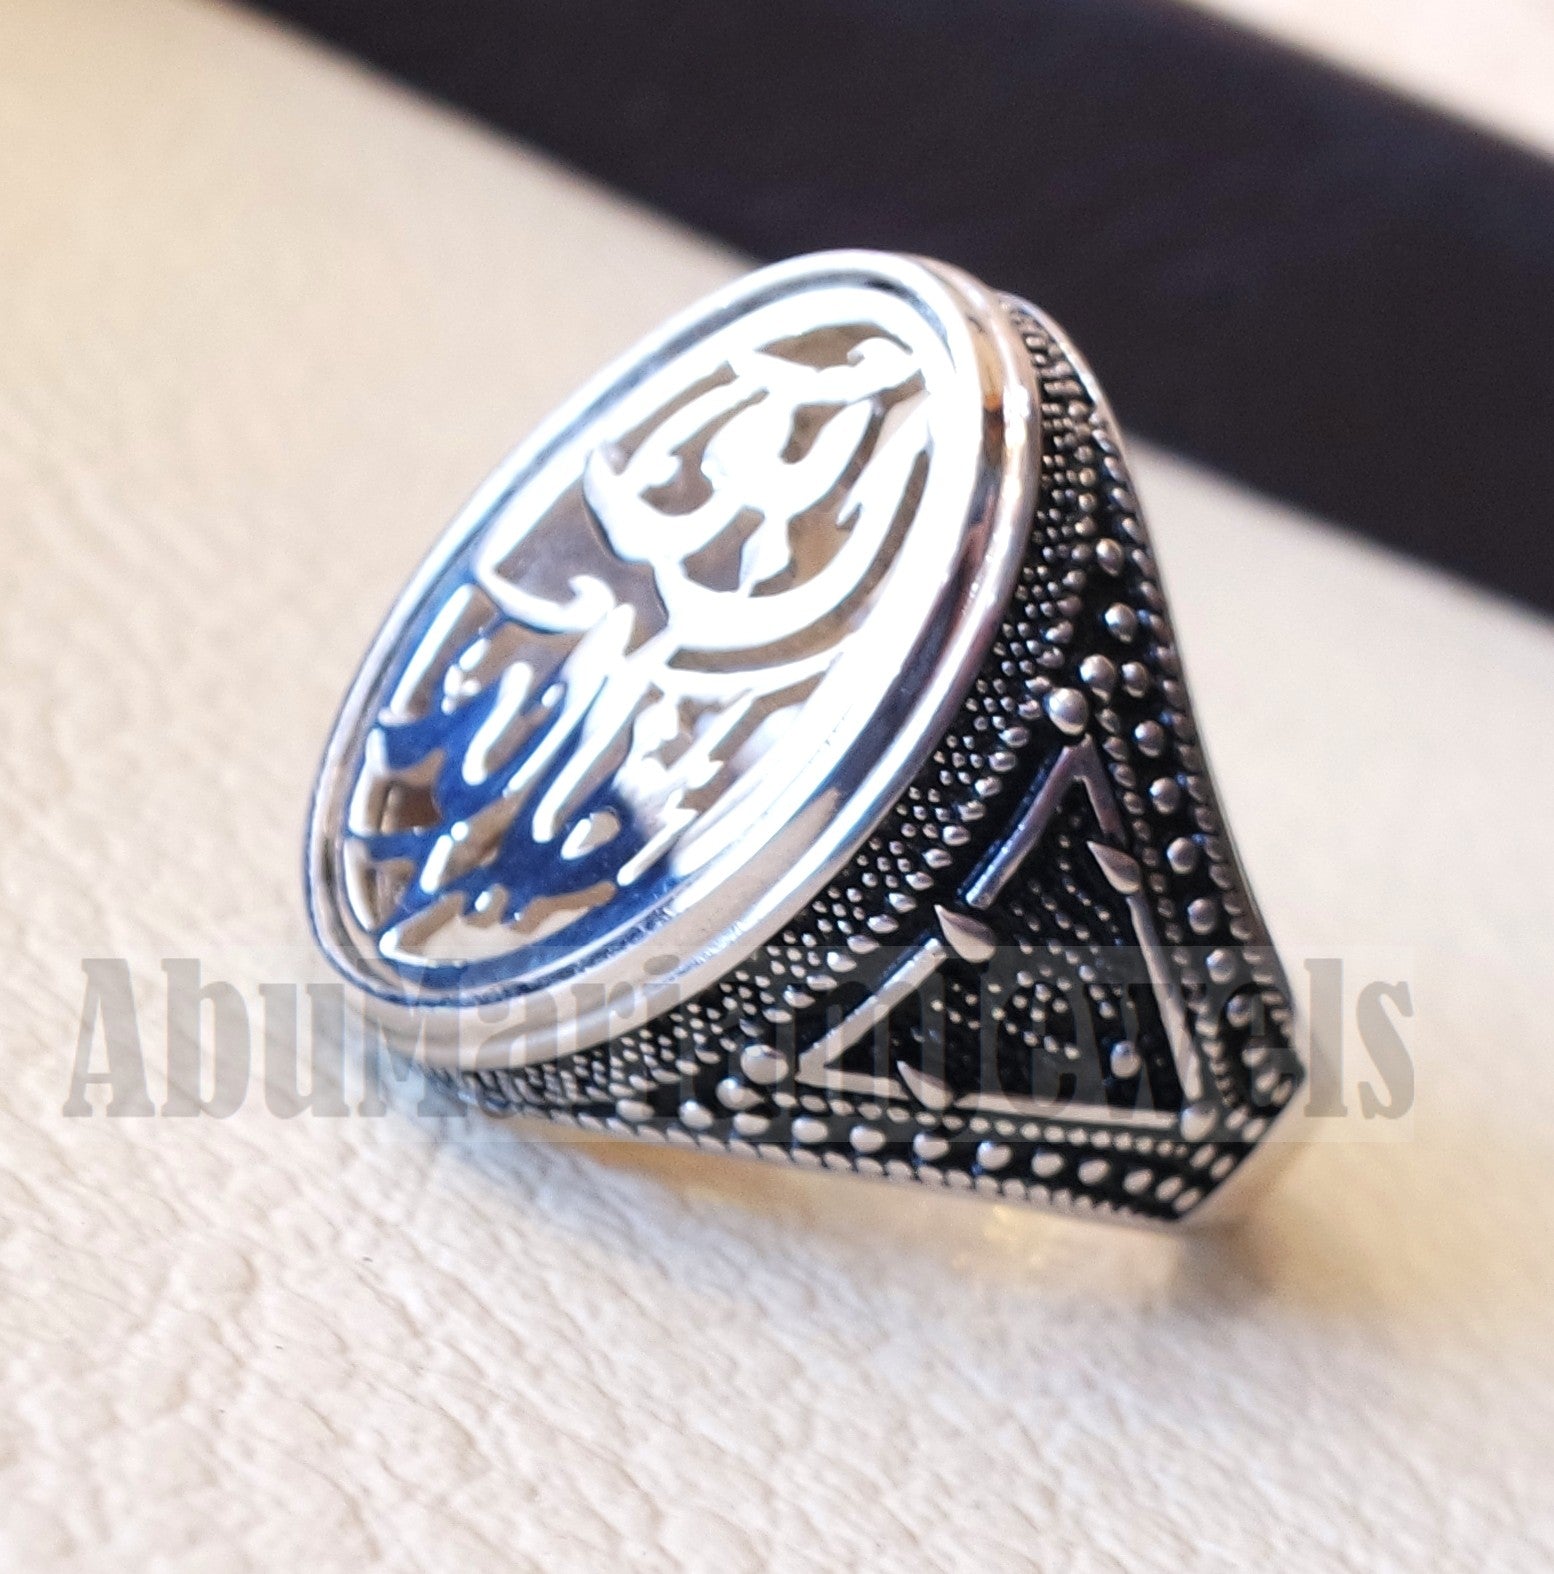 Customized Arabic calligraphy names ring personalized jewelry style sterling silver 925  any size TSN1004 خاتم اسم تفصيل